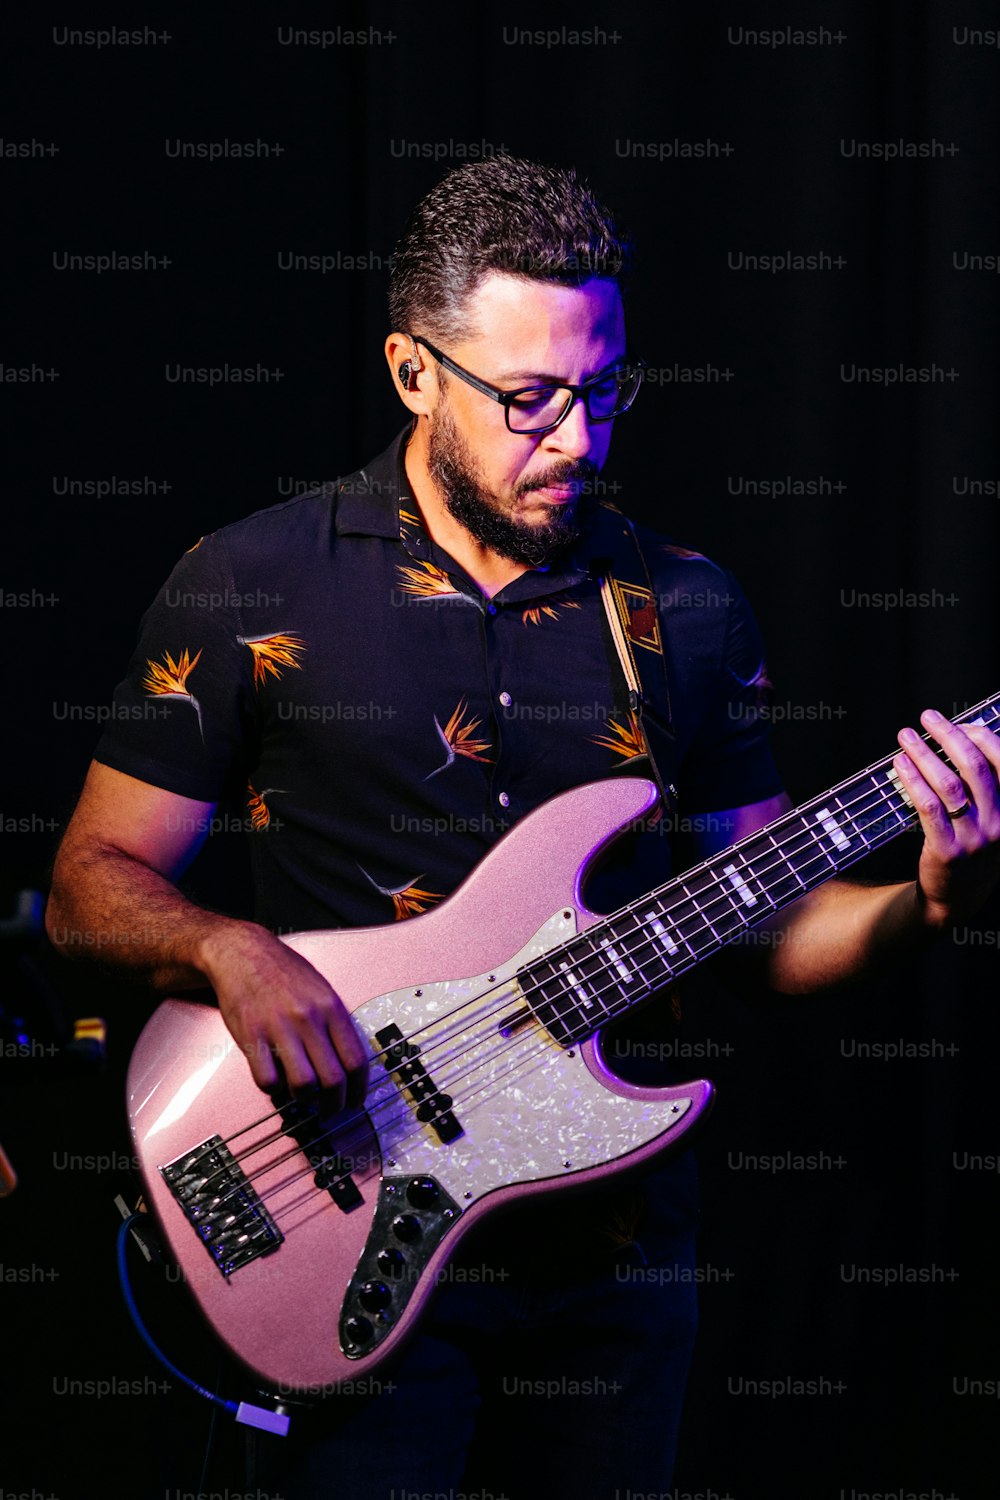 a man with glasses playing a pink guitar